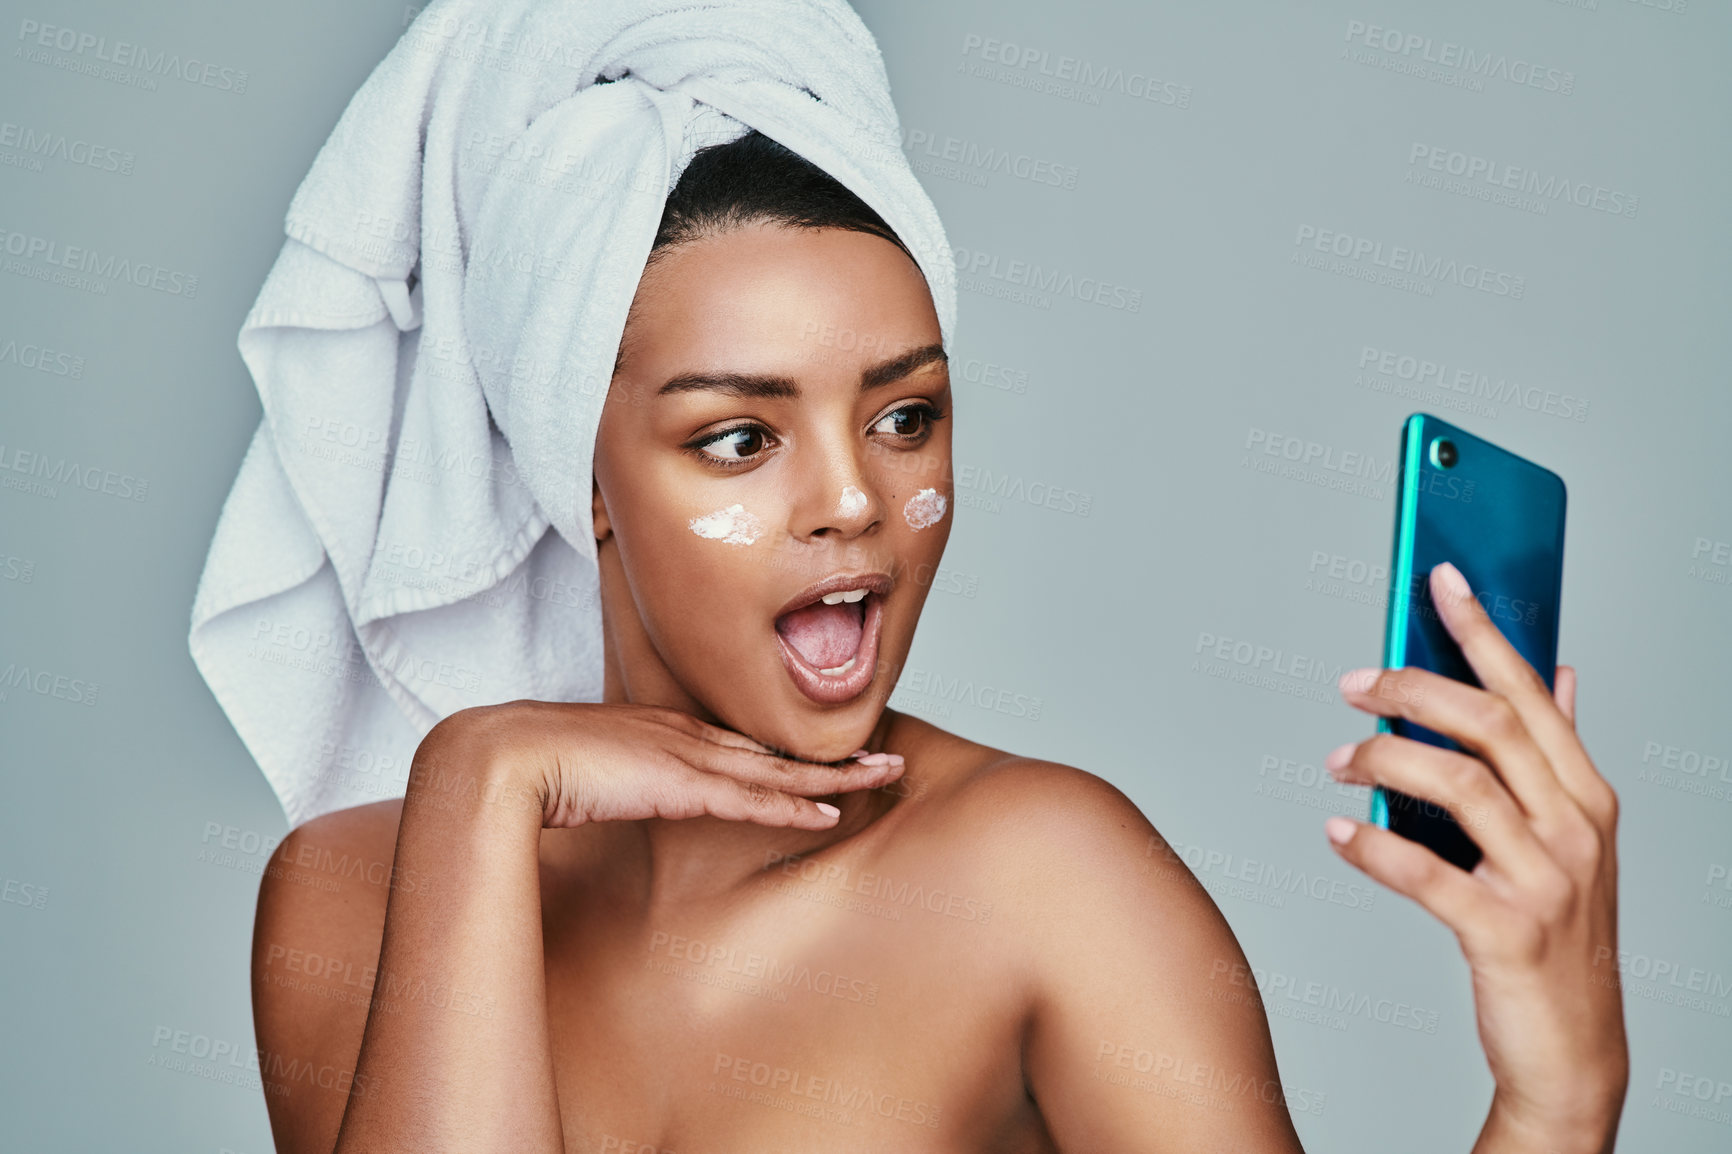 Buy stock photo Shot of a woman taking a selfie with a towel wrapped around her hair and moisturizer on her face